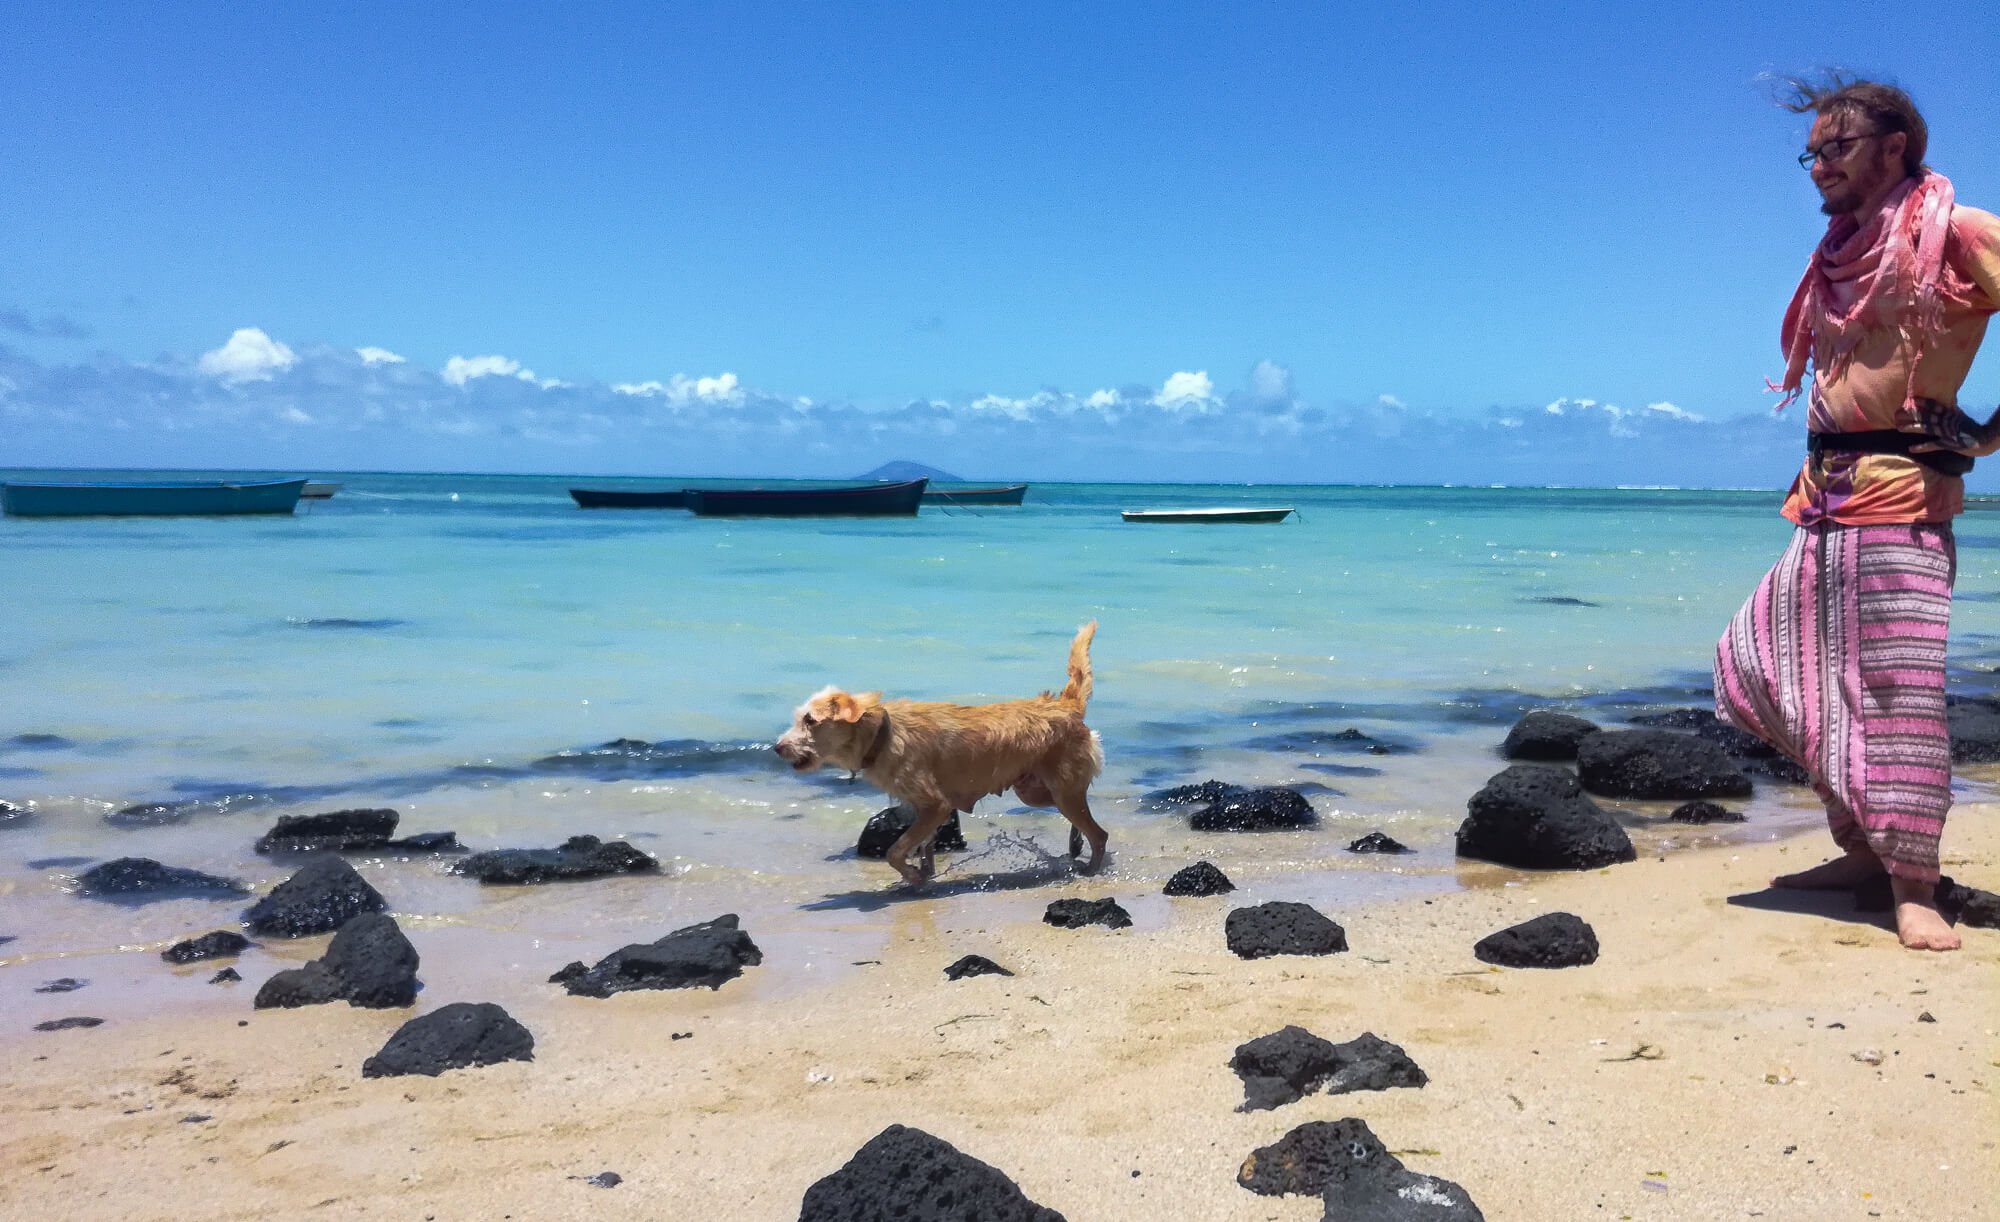 A backpacker visiting Mauritius walking with a dog on a public beach